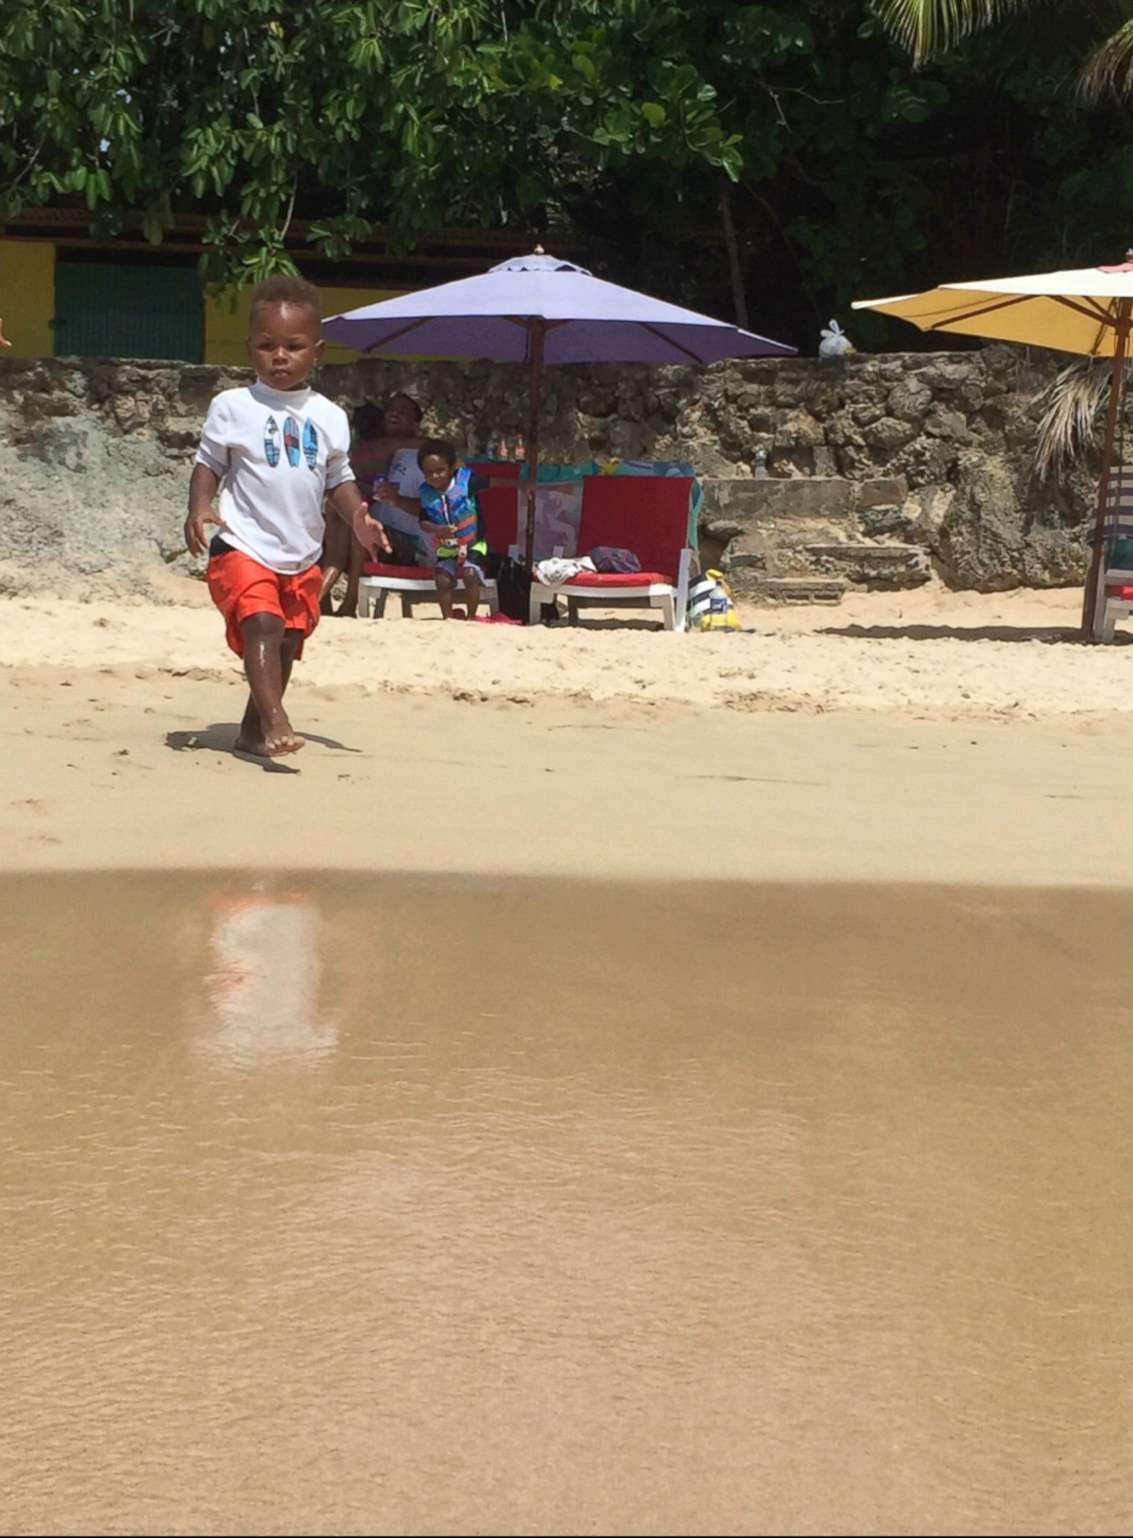 PHOTO: Brooke Crittendon's 3-year-old son Lennon in Trinidad in Summer 2017.